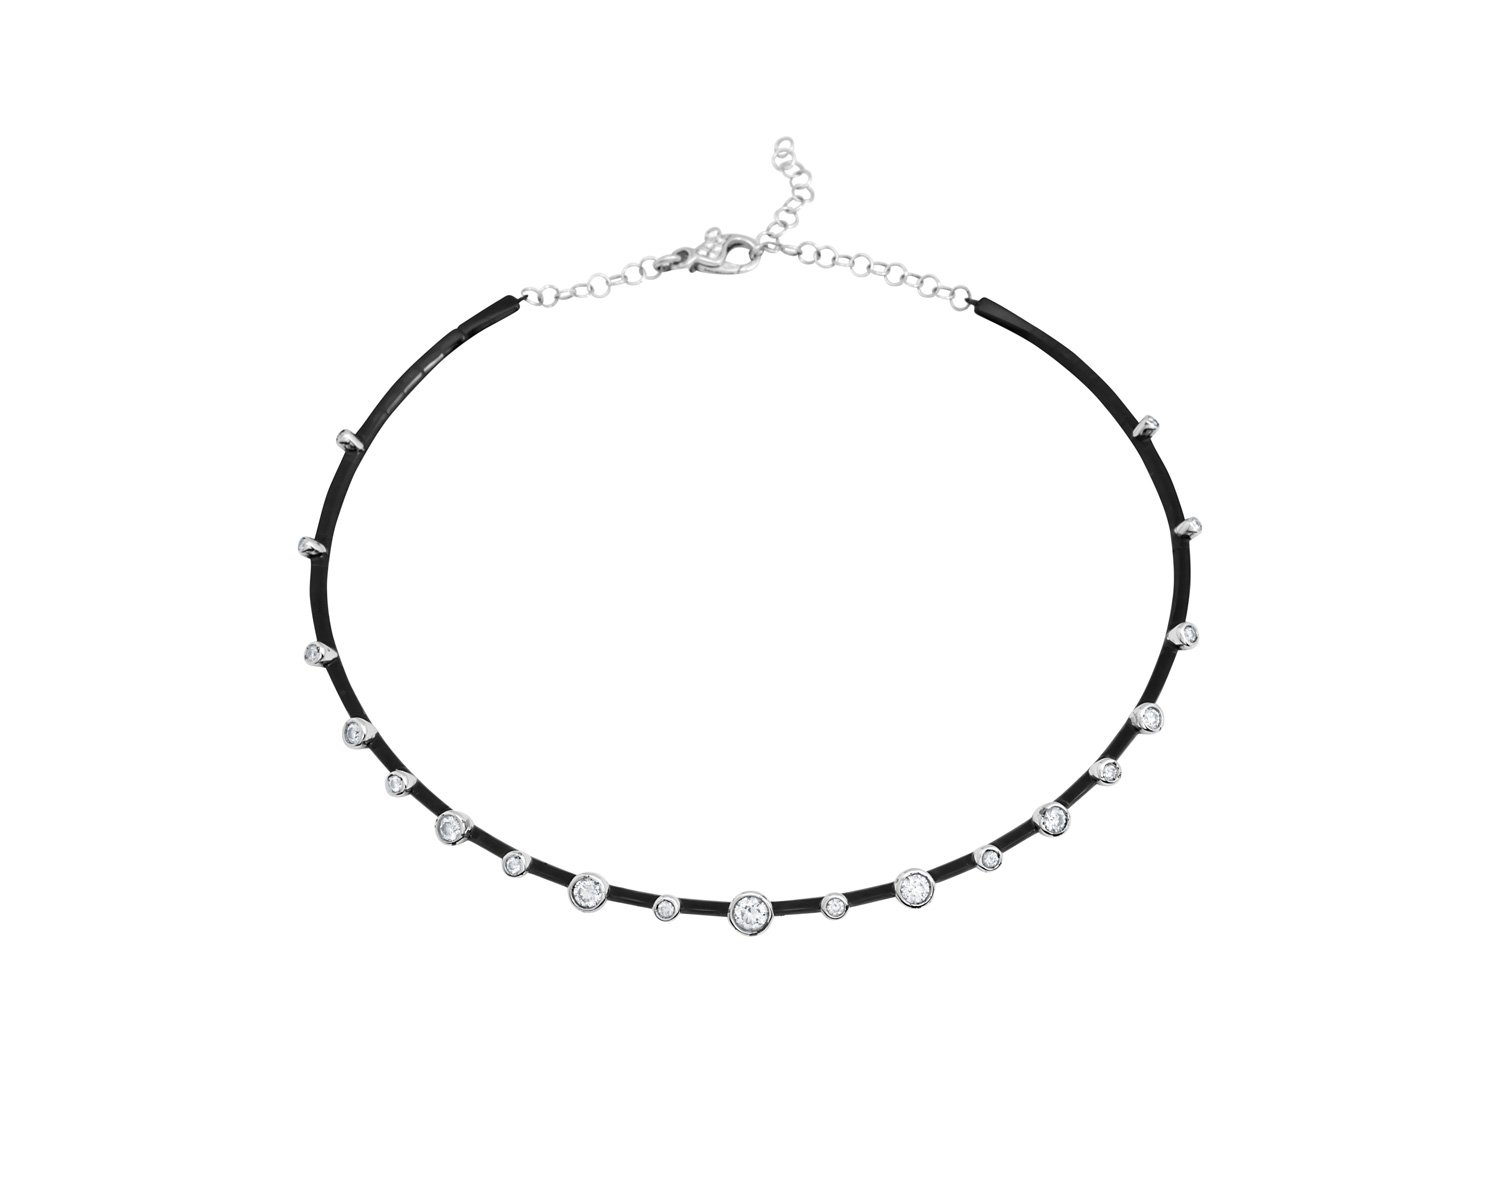 Mariani Diamond Elettra diamond station necklace in 18kt white & black gold, weighing 1.81 total carats